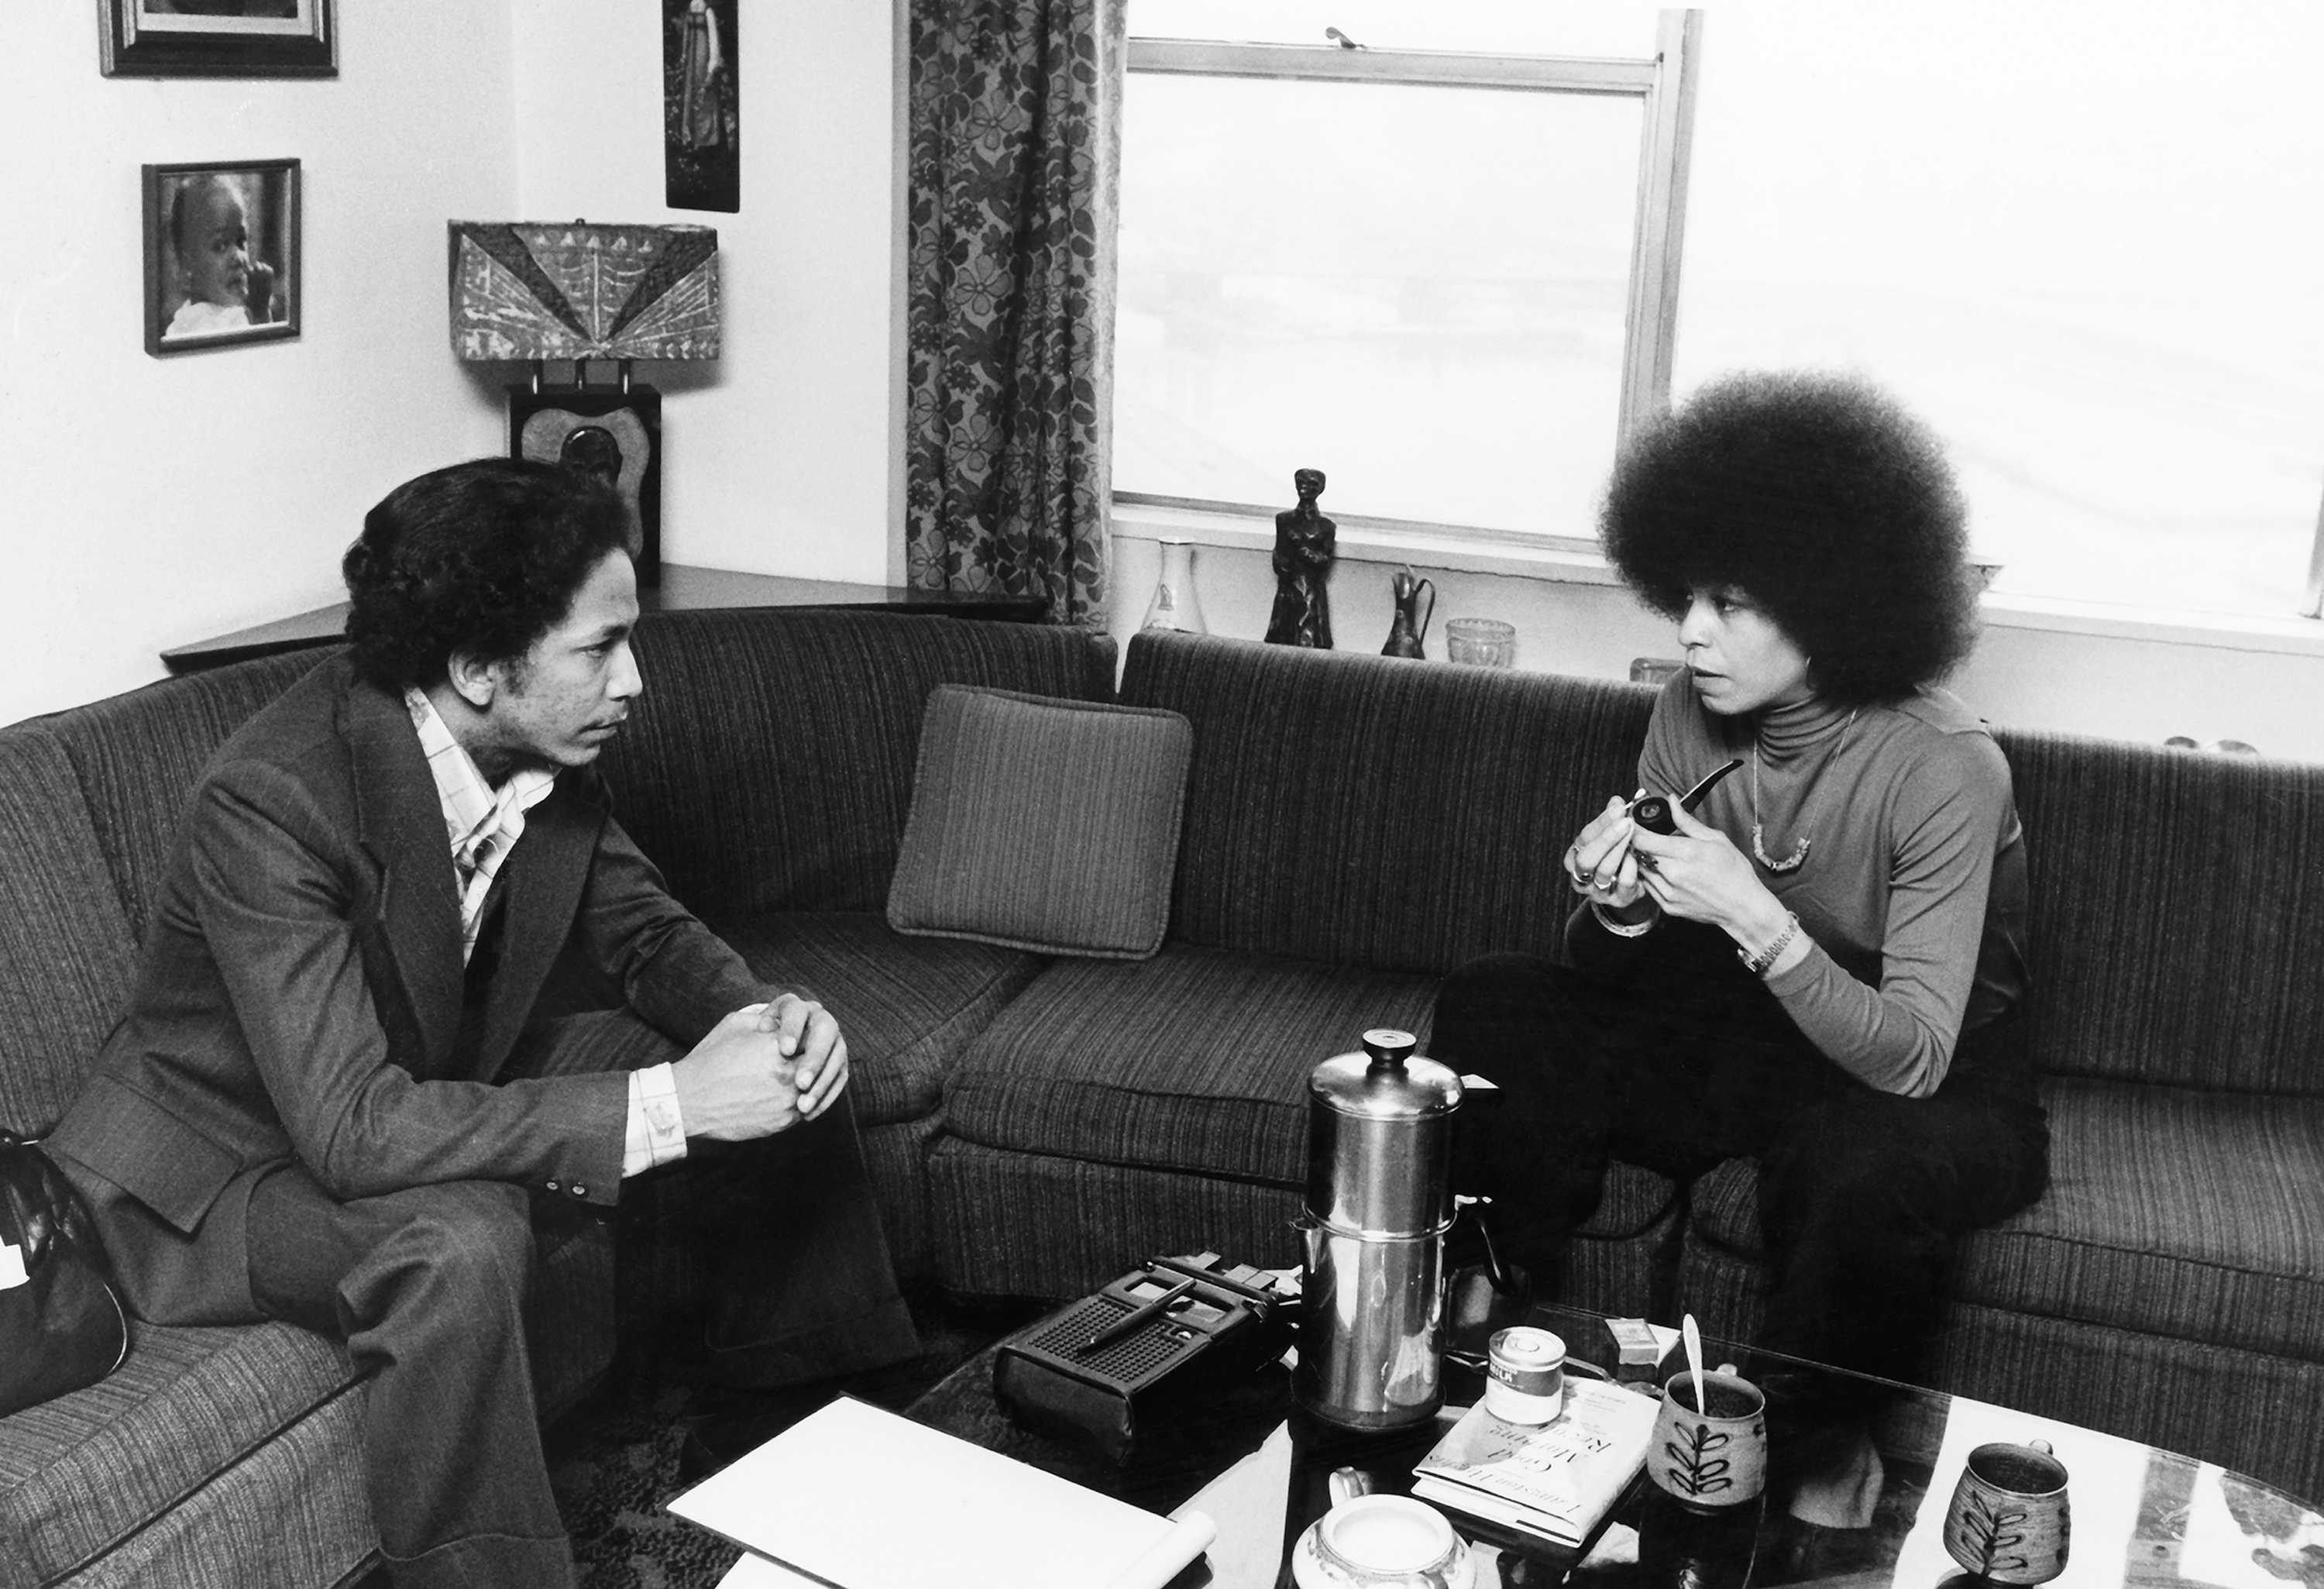 Black and white photograph of Robert A. DeLeon interviewing Angela Davis seated on sofas